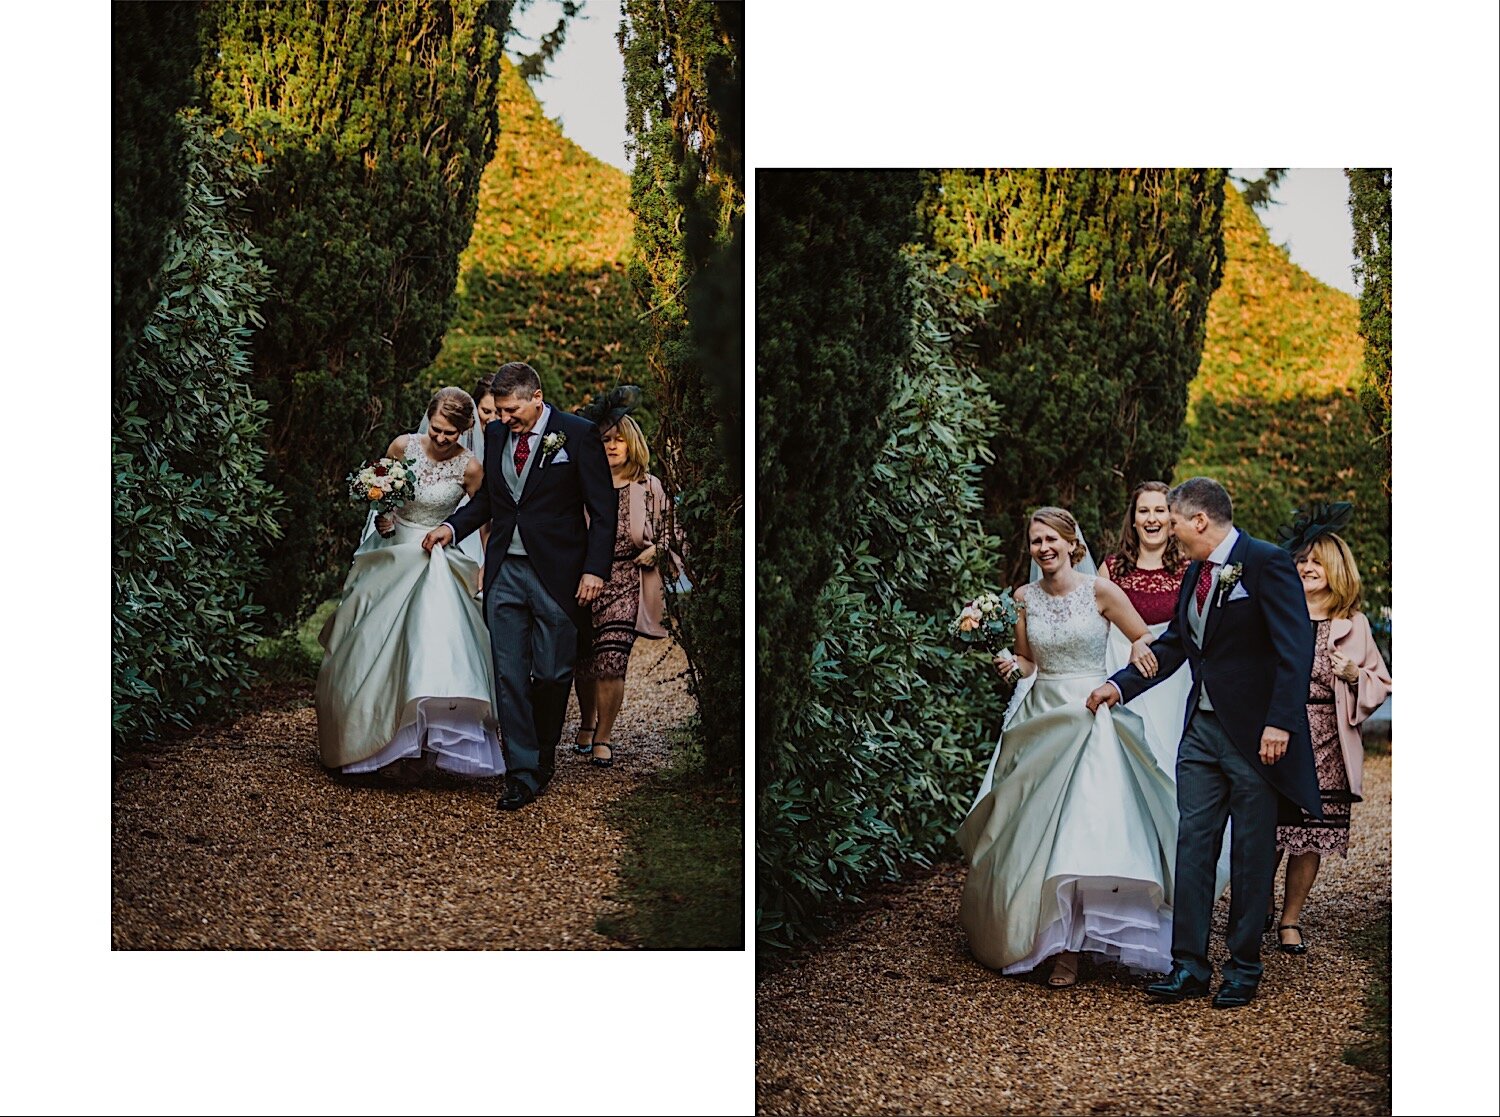 049_TWS-423_TWS-425_bride_tribe_bridesmaids_church_father_photography_henley_oxfordshire_millitary_crooked_wedding_groom_billet_winter.jpg